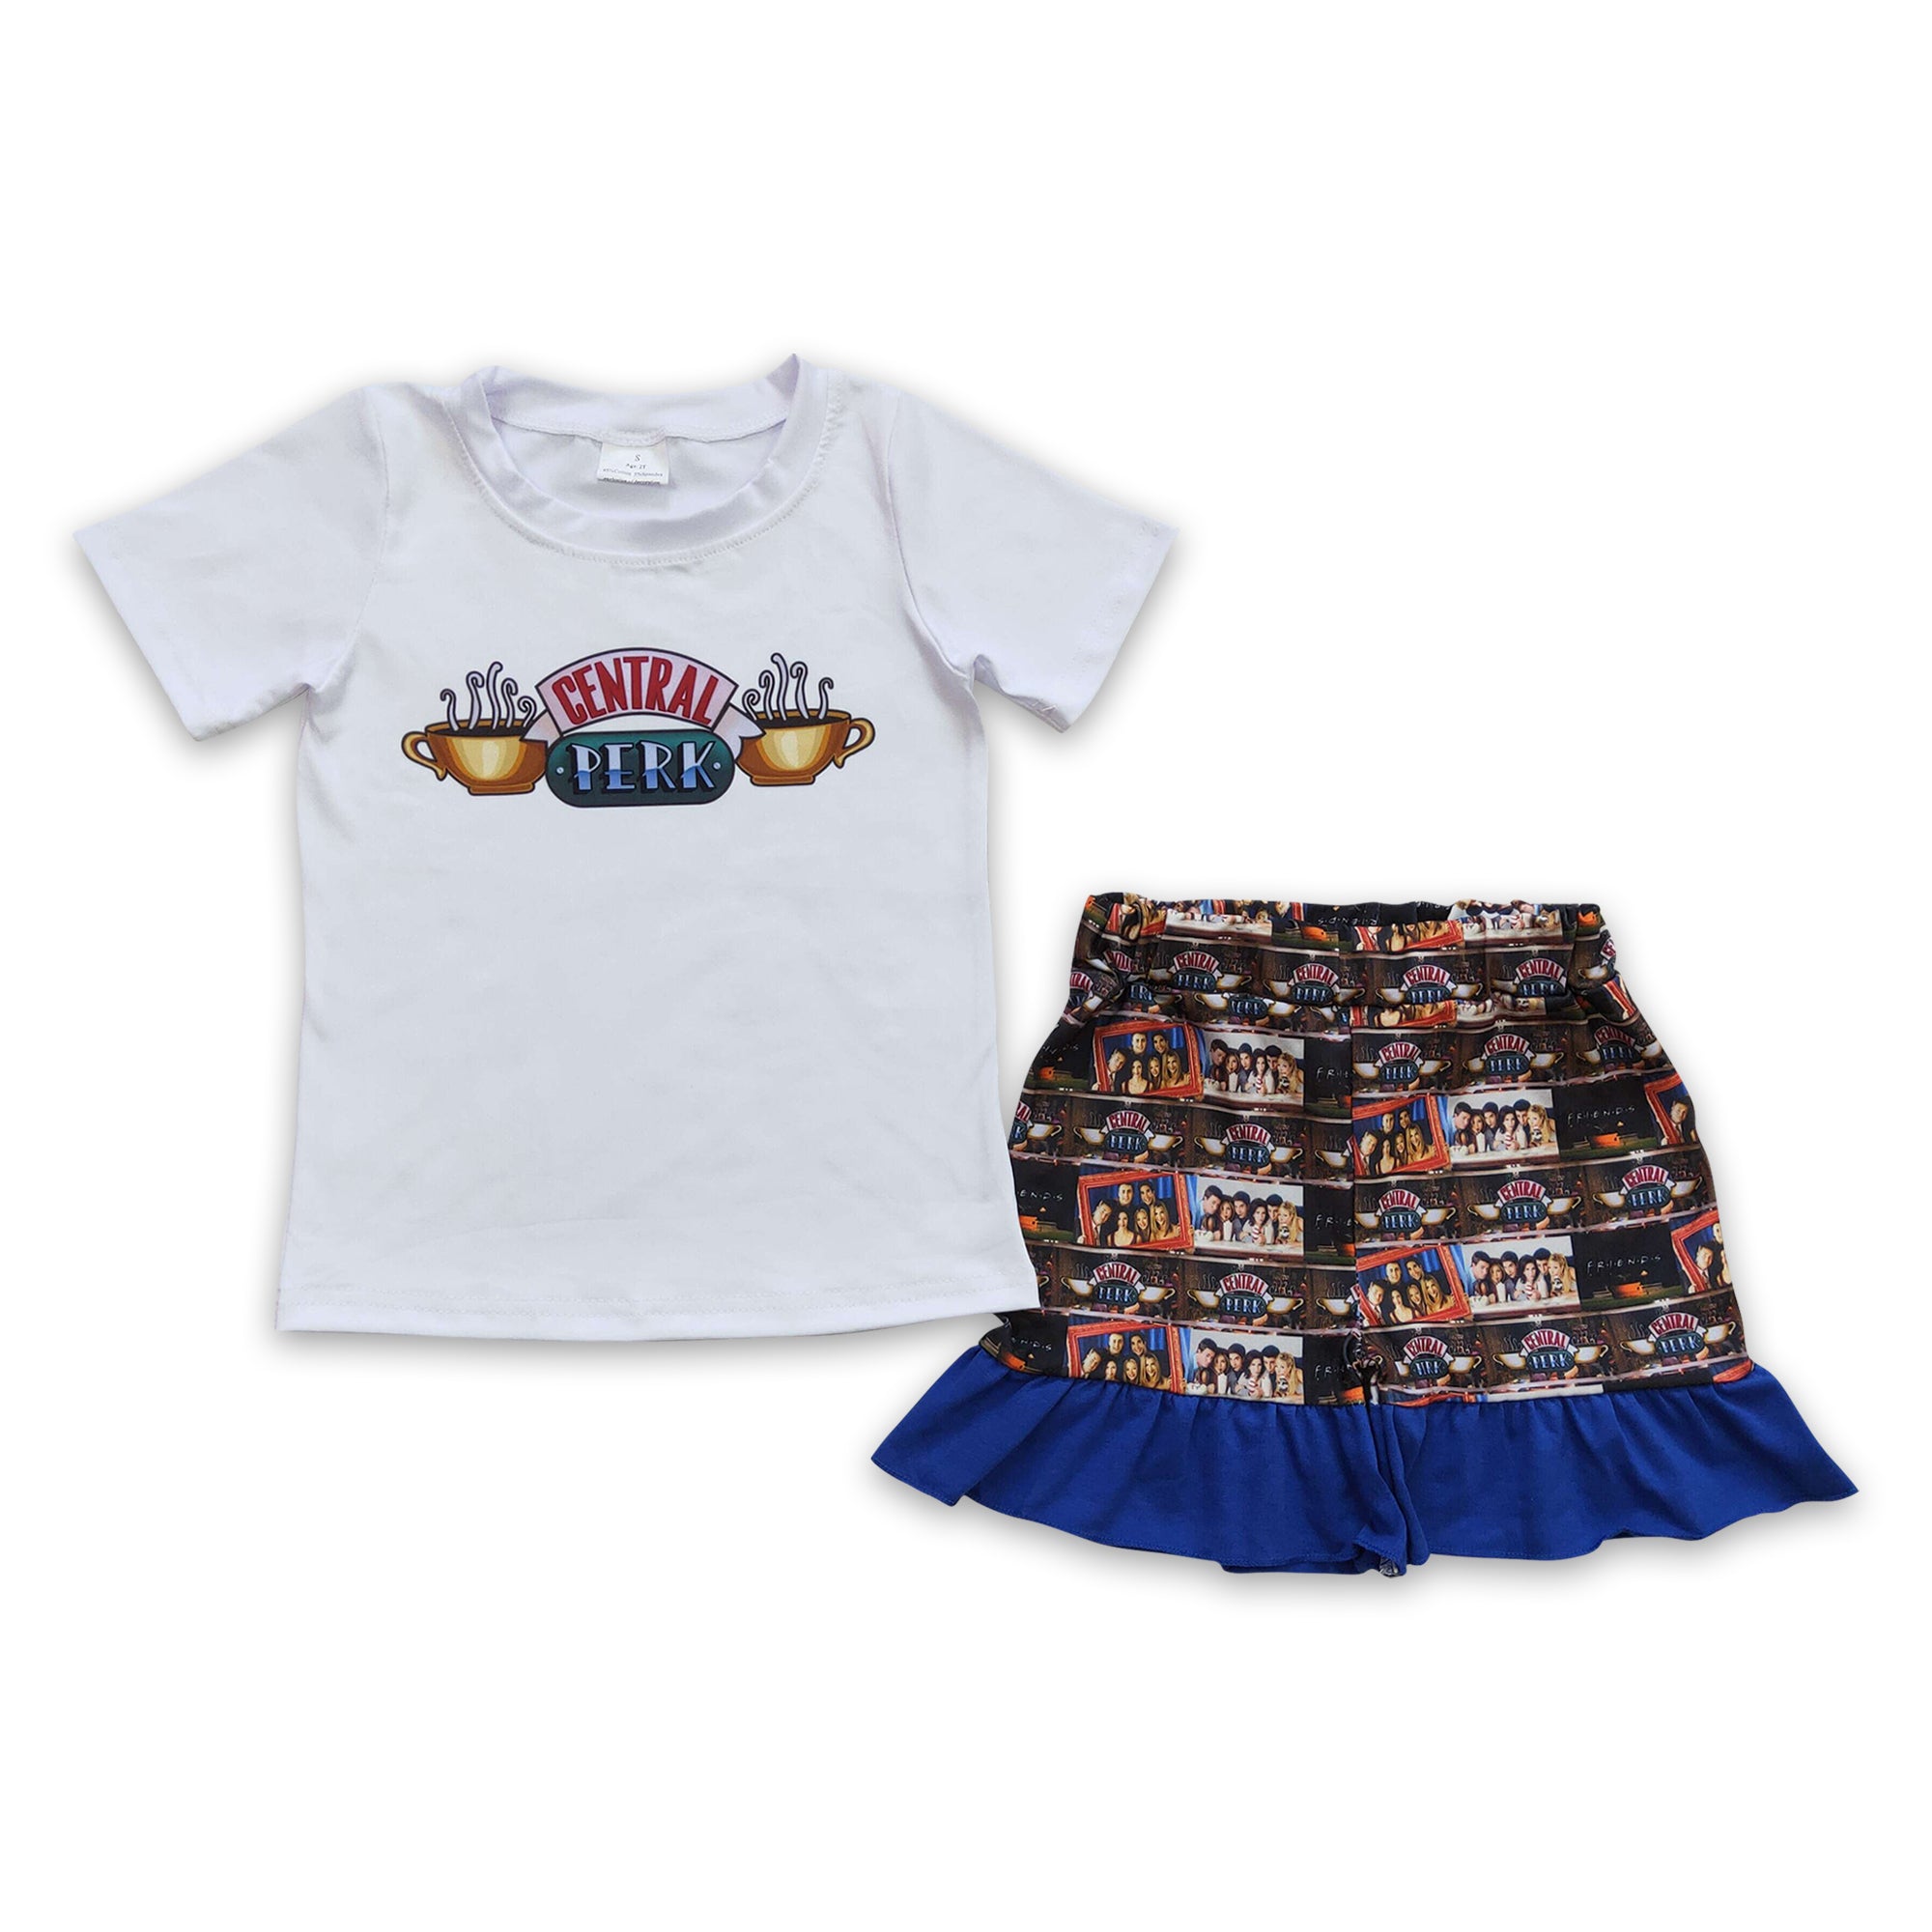 C3-2 kids clothes girls friends summer outfits